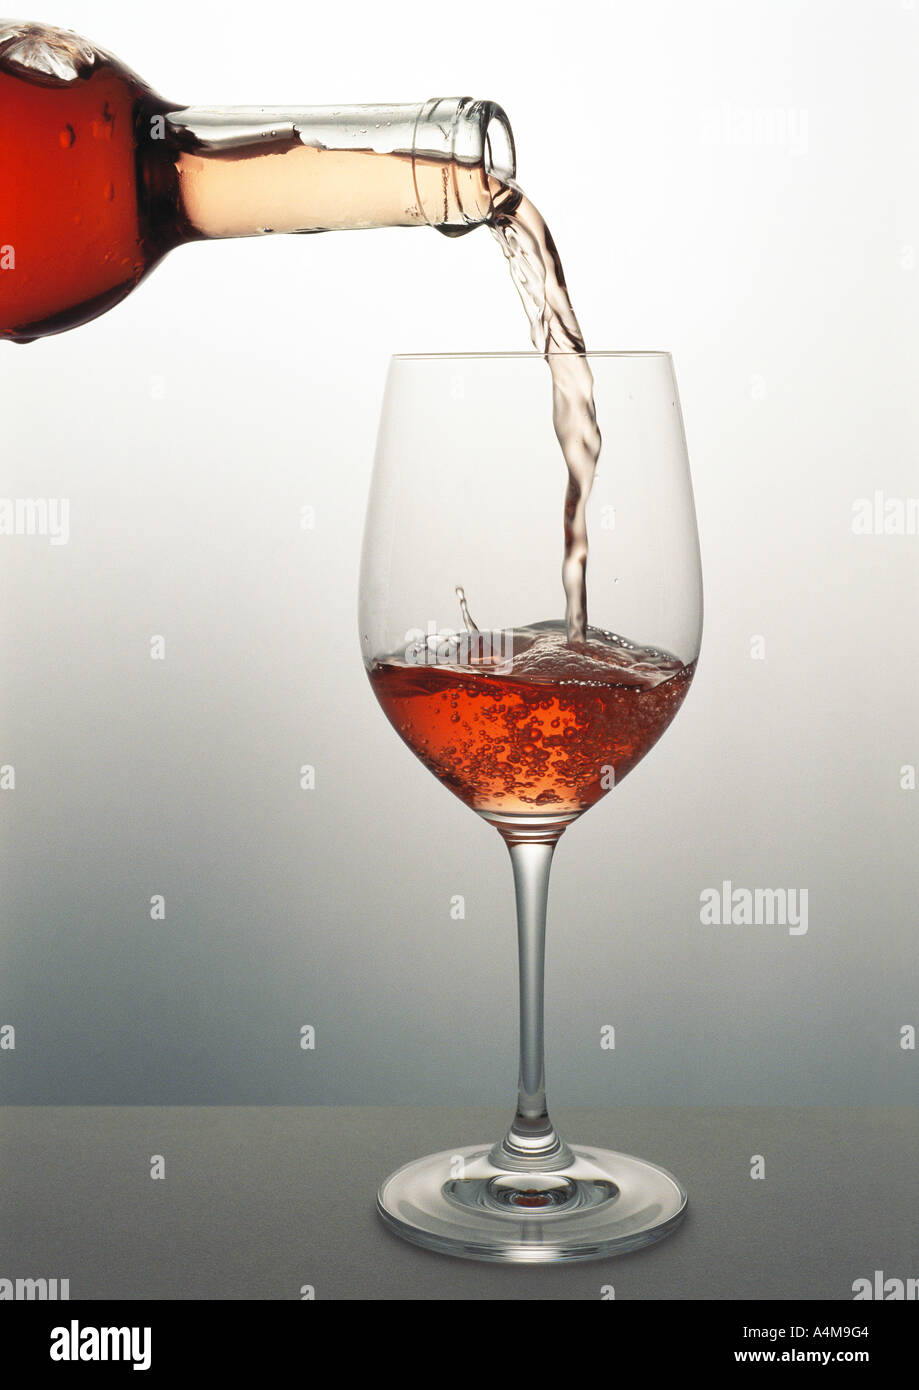 Pouring a glass of rosŽ wine Stock Photo